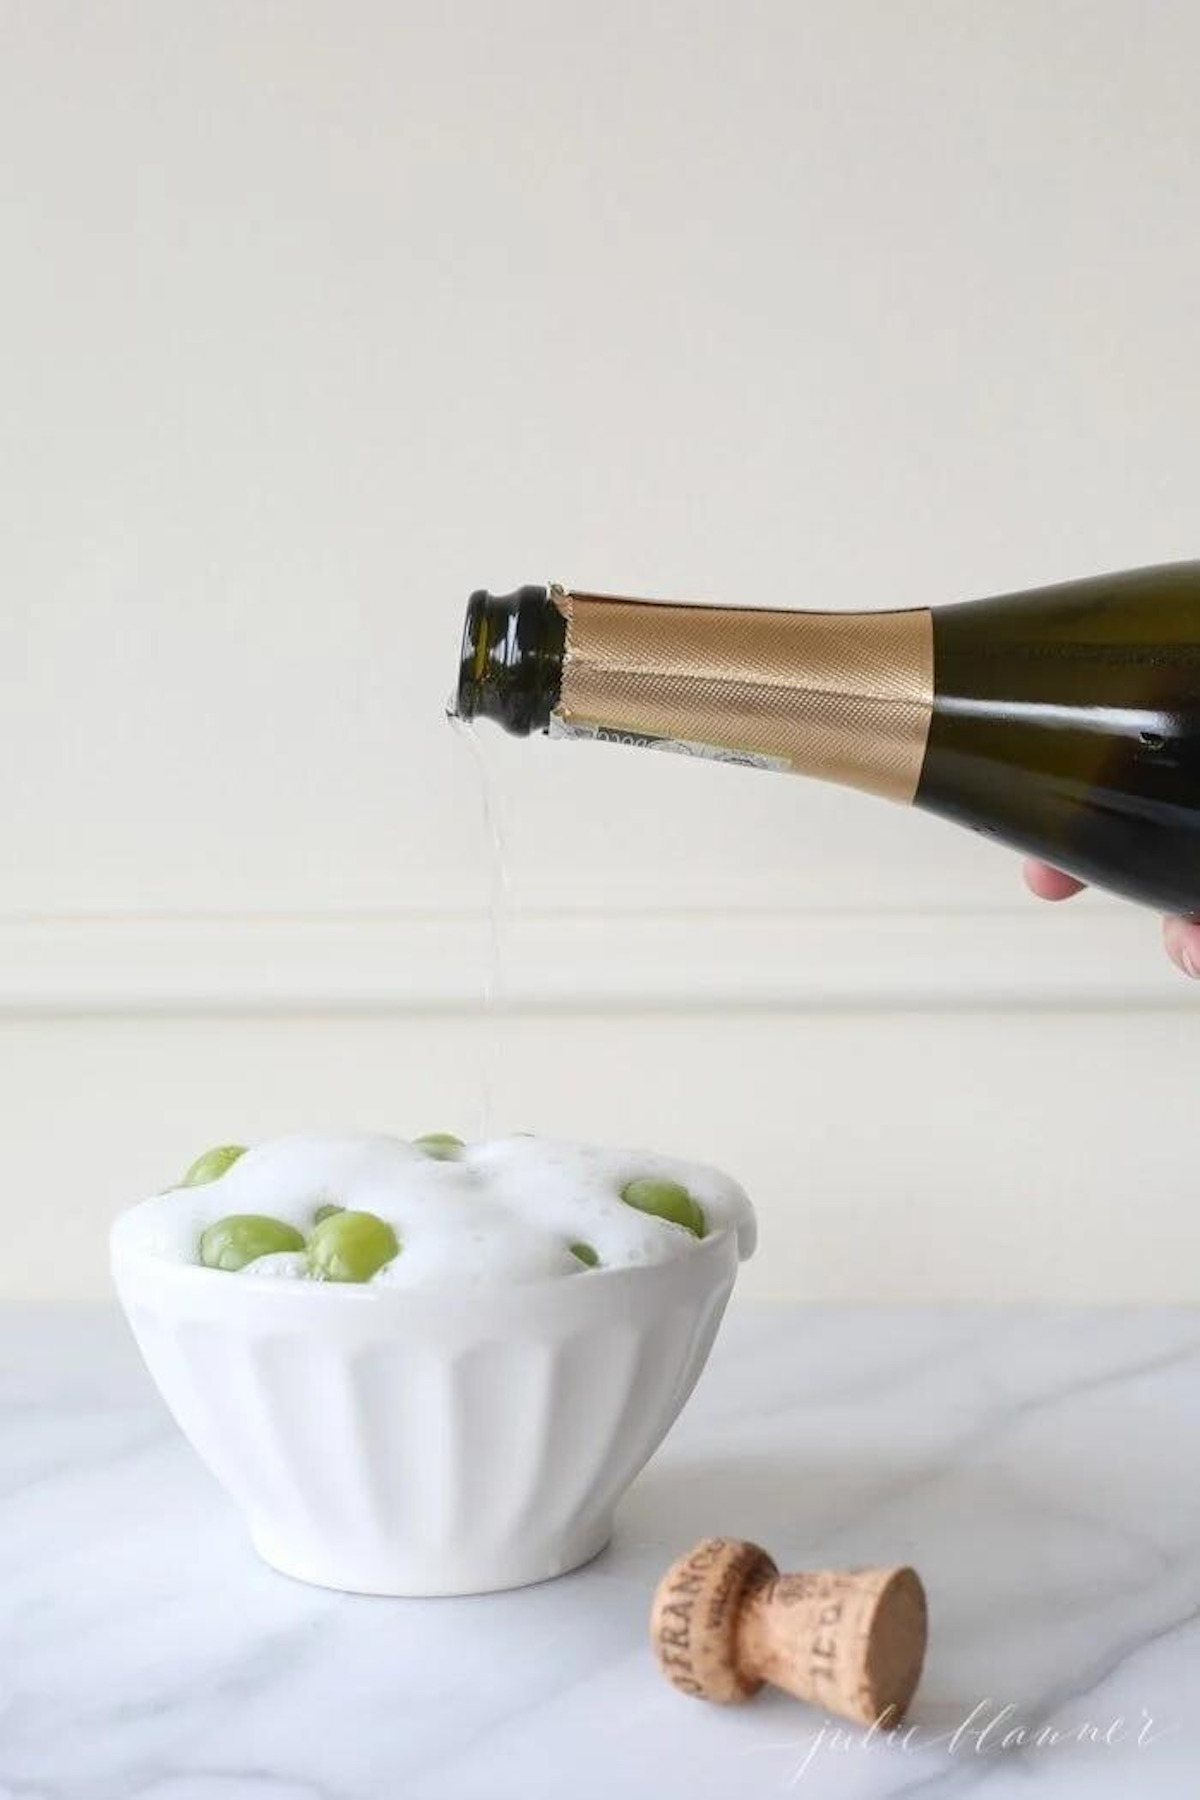 A bottle of champagne being poured over a bowl of green grapes.